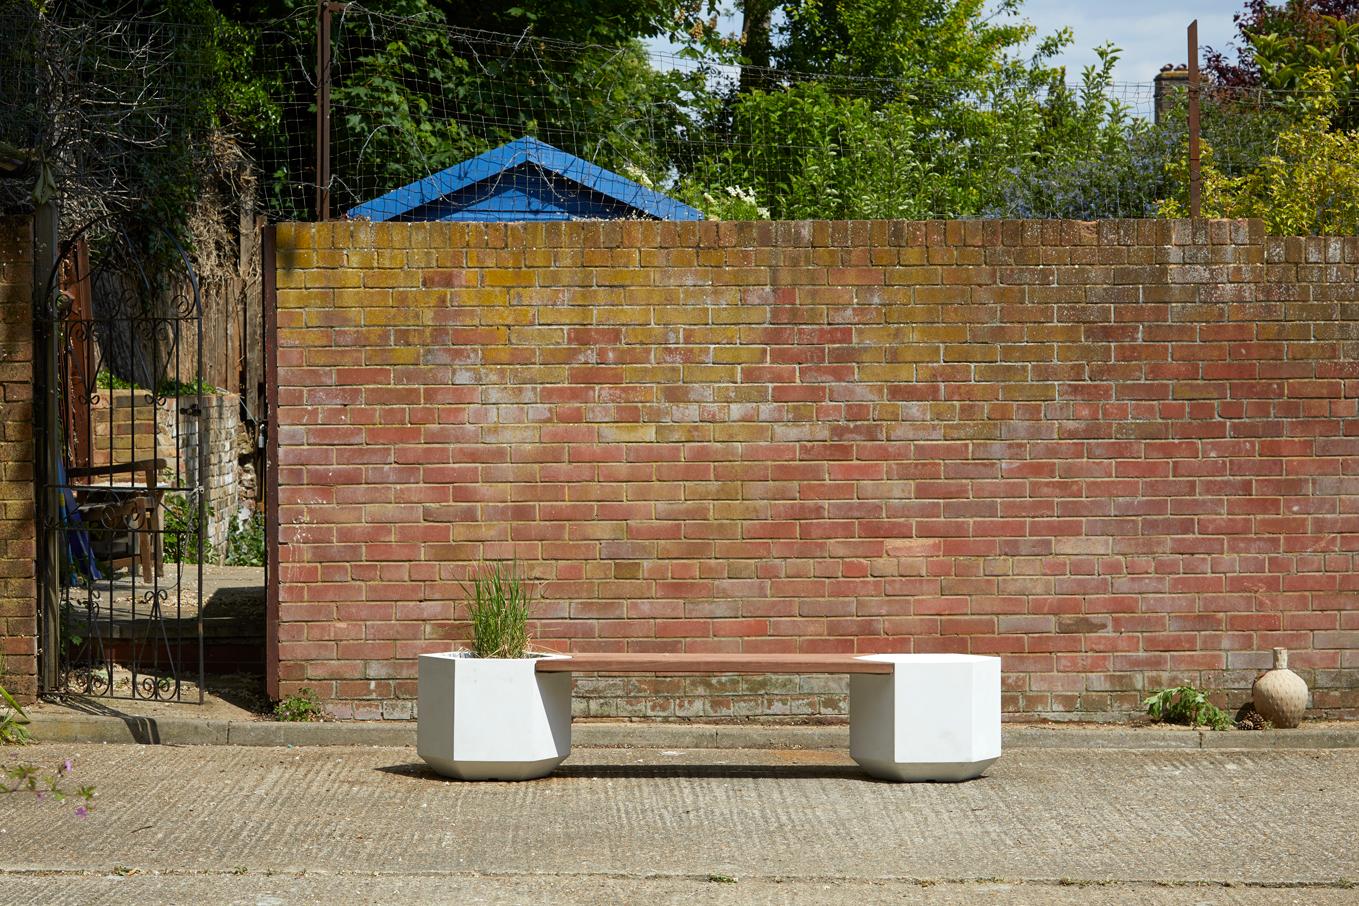 The Hex-bench available in two widths 150cm and 180cm. This striking bench has a planter at 1 or both ends, it is handcrafted for the outdoors is made out of glass-reinforced concrete and reclaimed Ekki.

Glass-reinforced concrete considerably